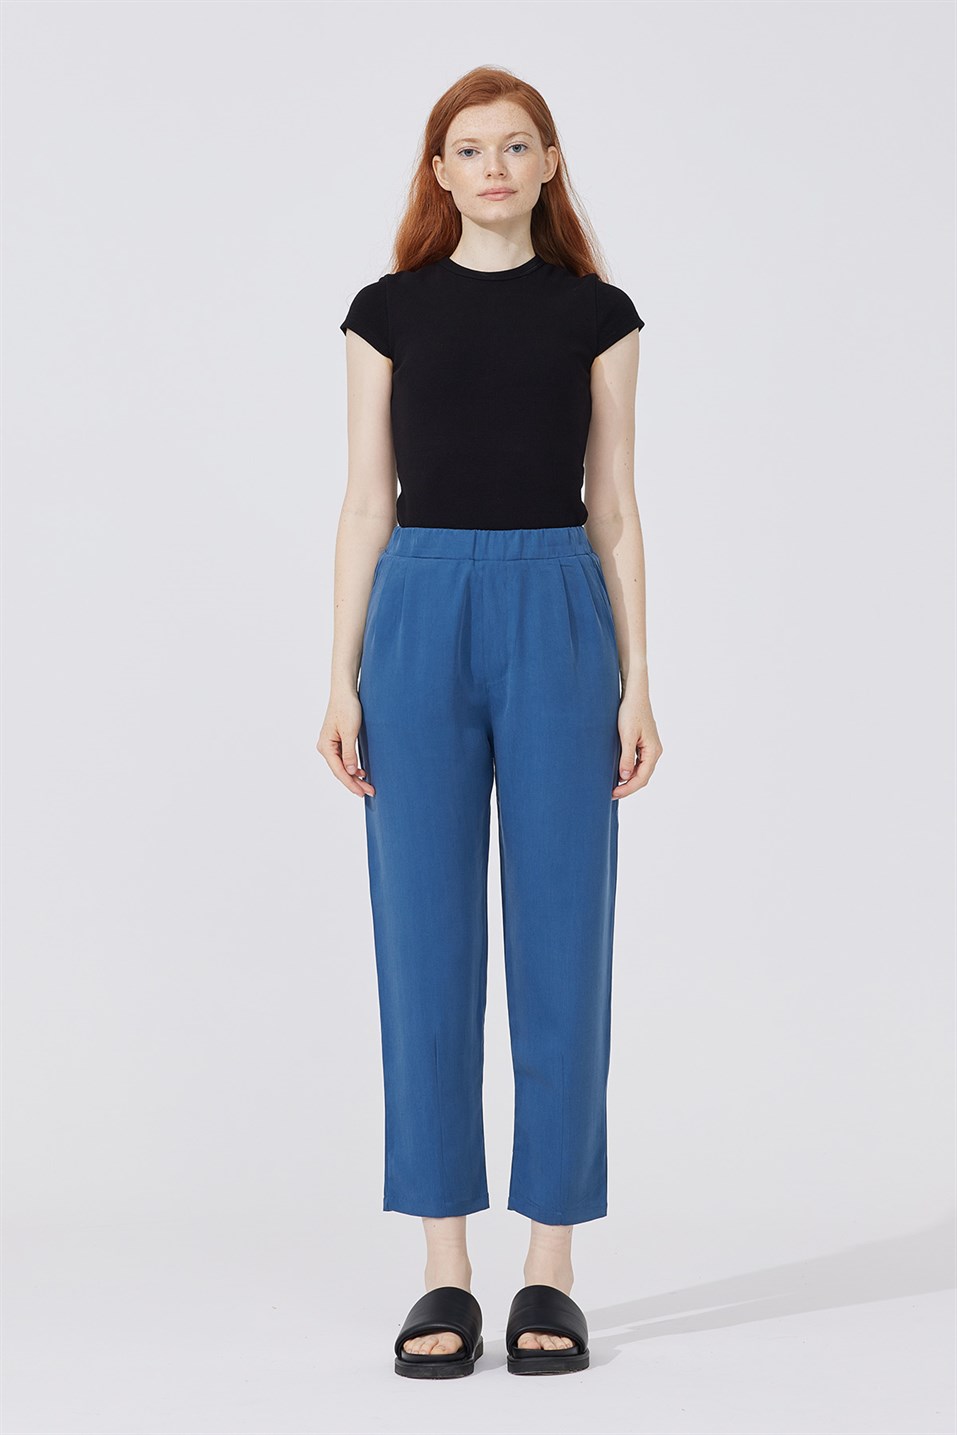 Saxe Pleated Tencel Trousers